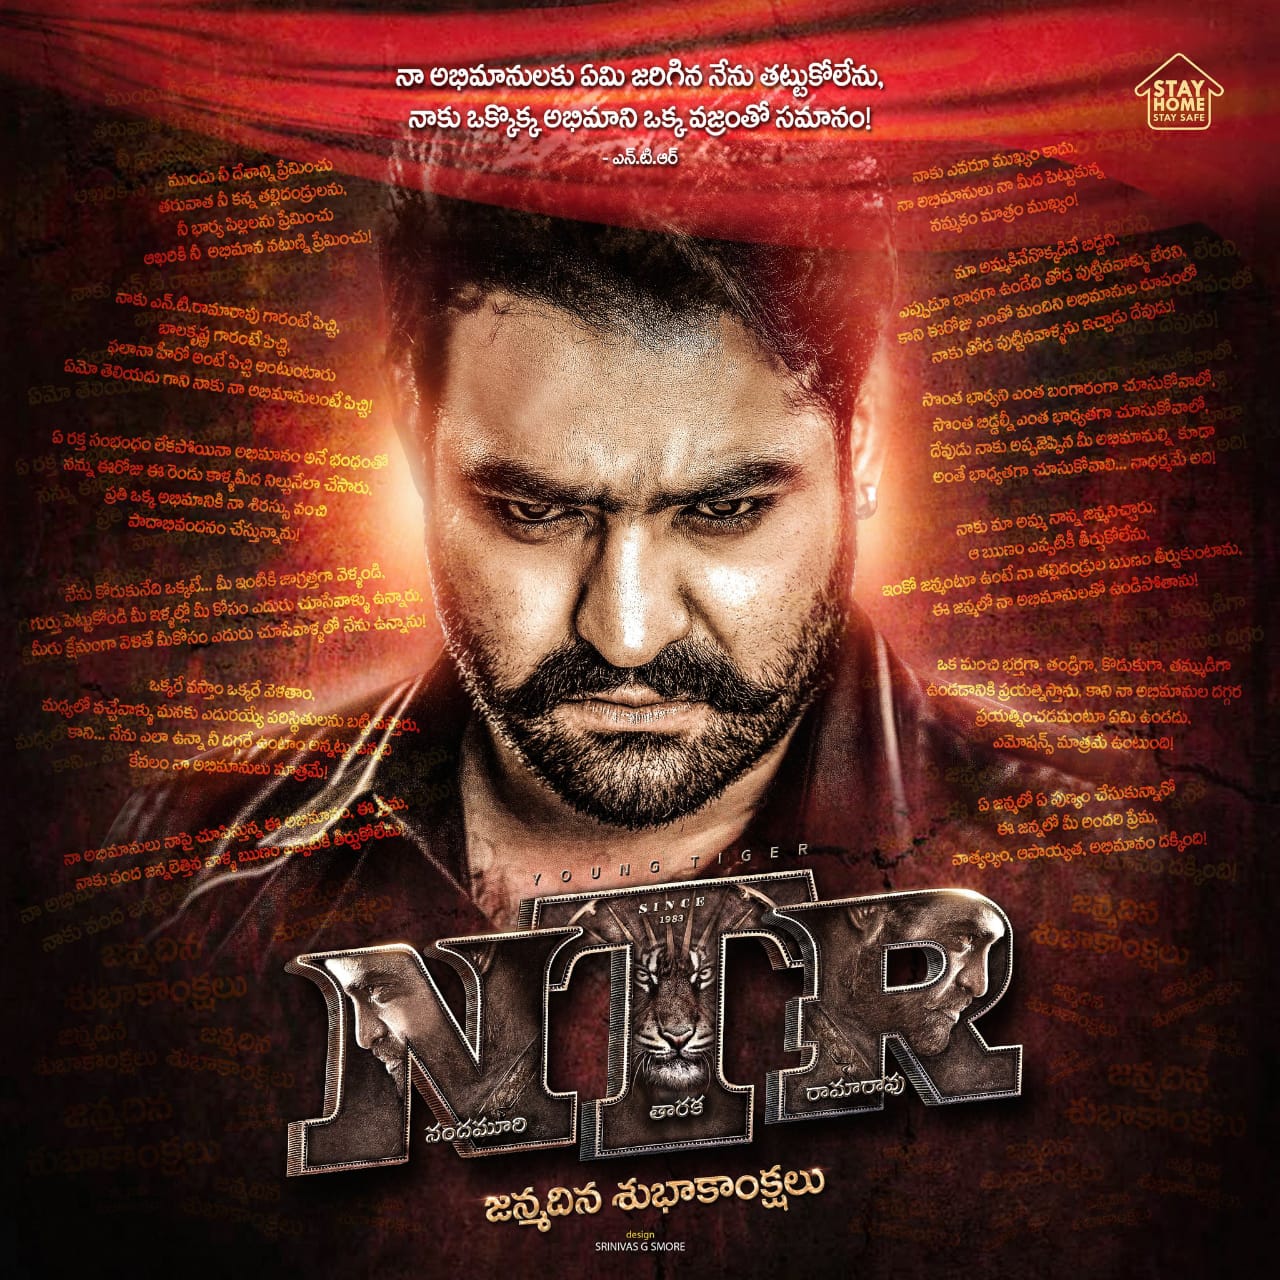 Jr NTR's Birthday Design Is Finally Out! Achieves The Feat Of